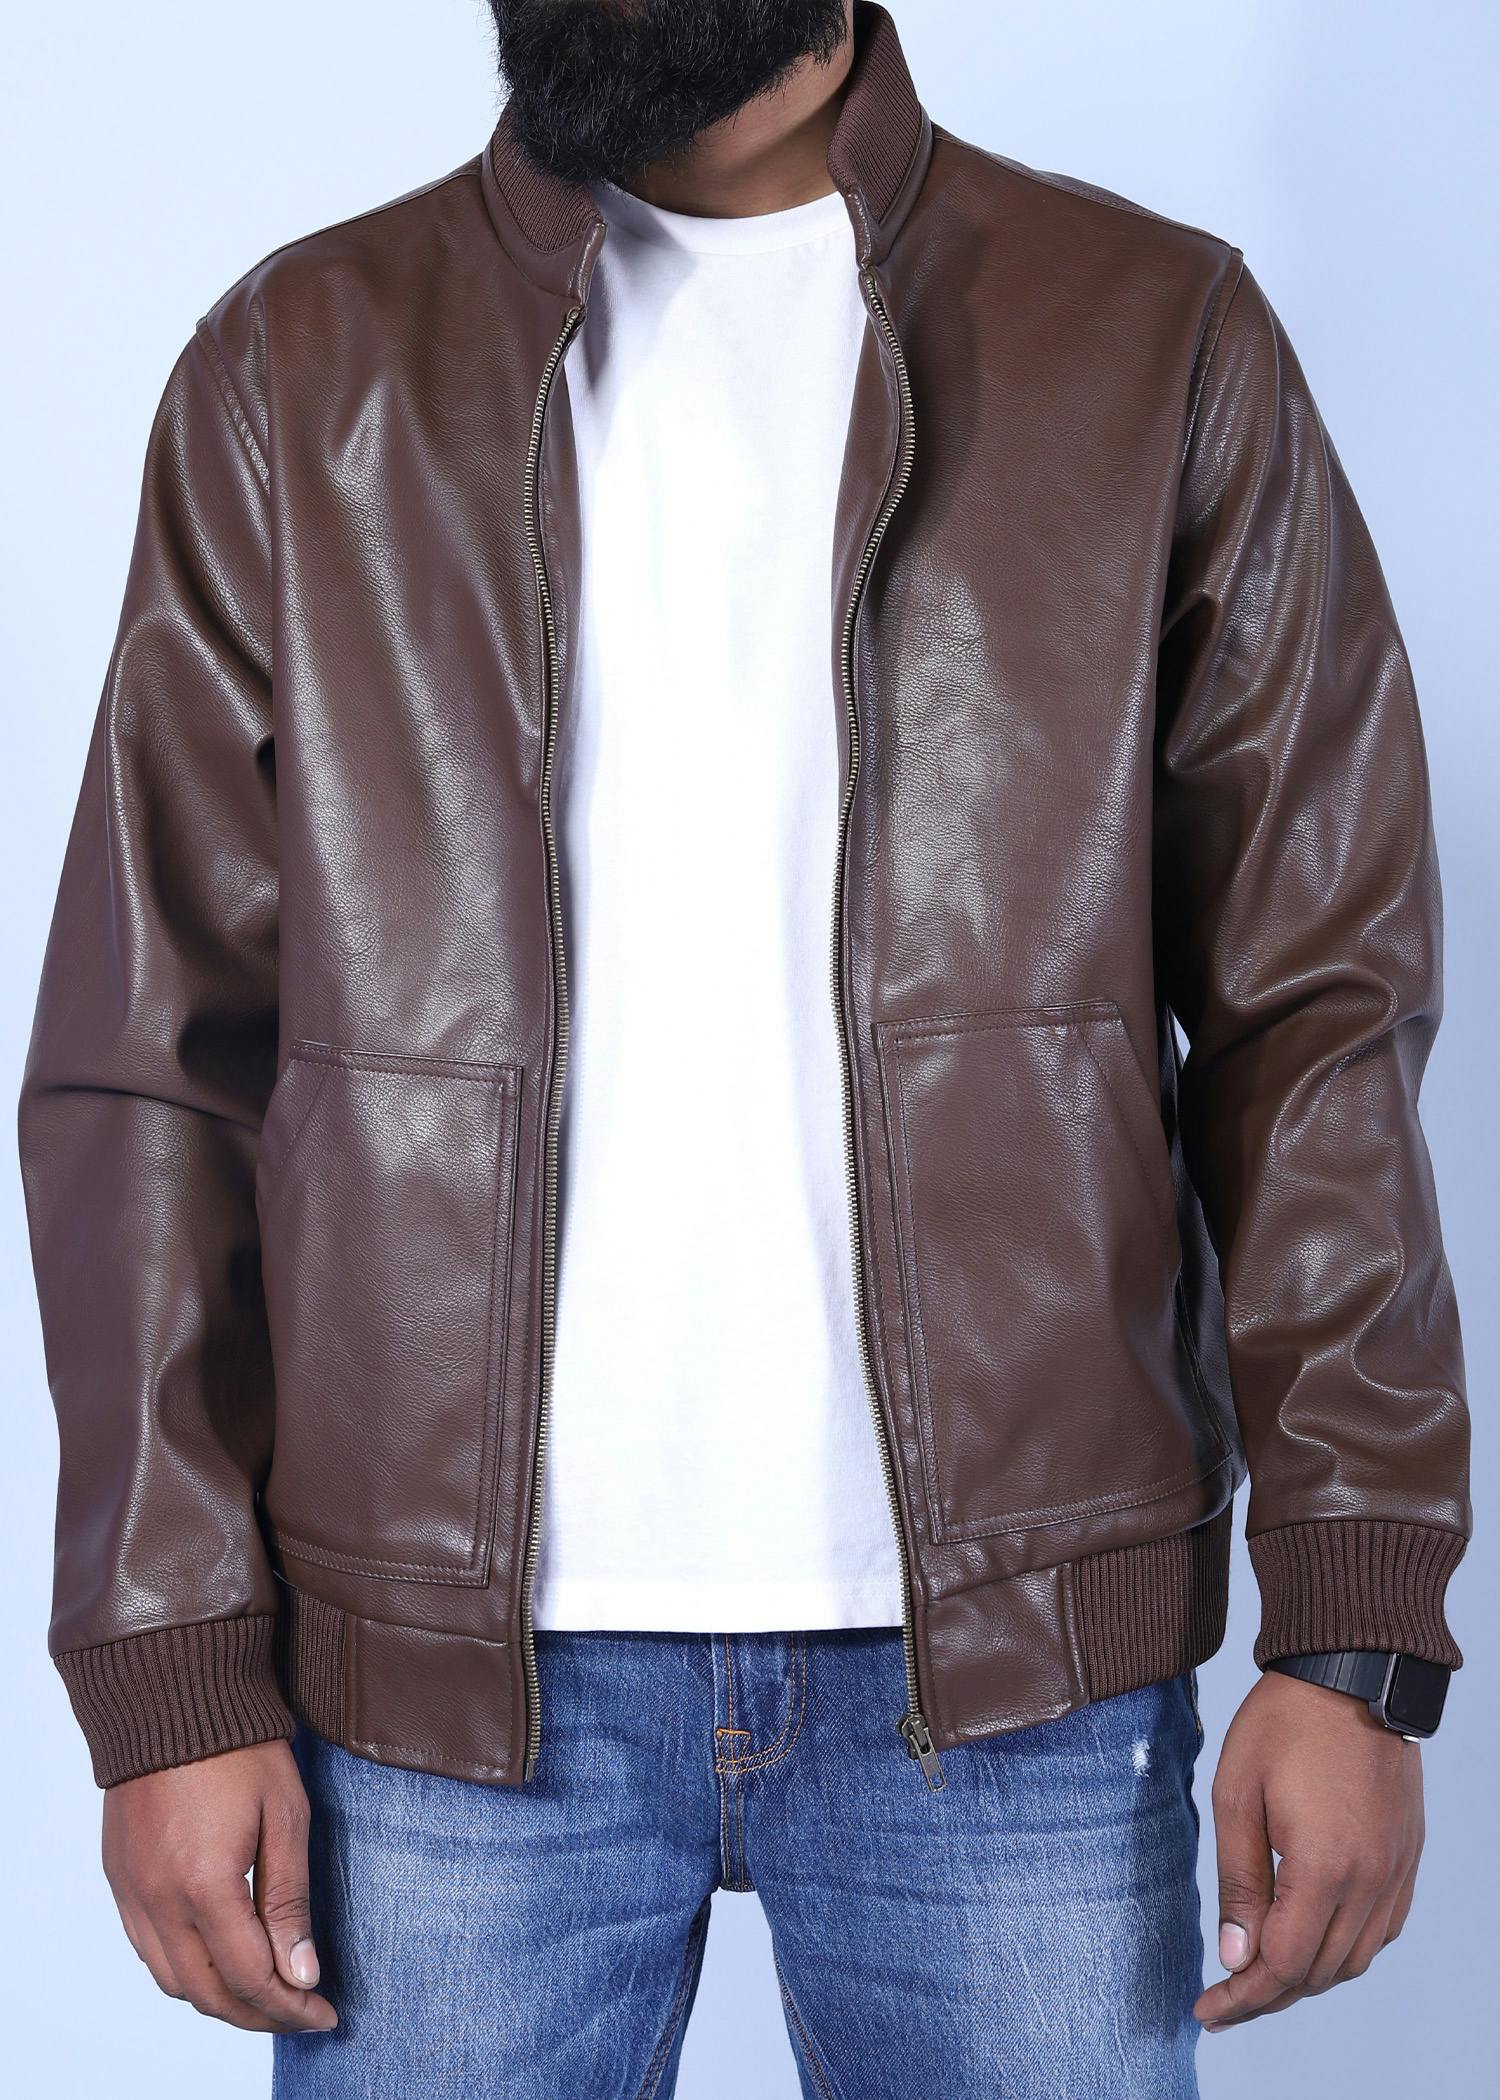 sunbittern leather jacket brown color half front view